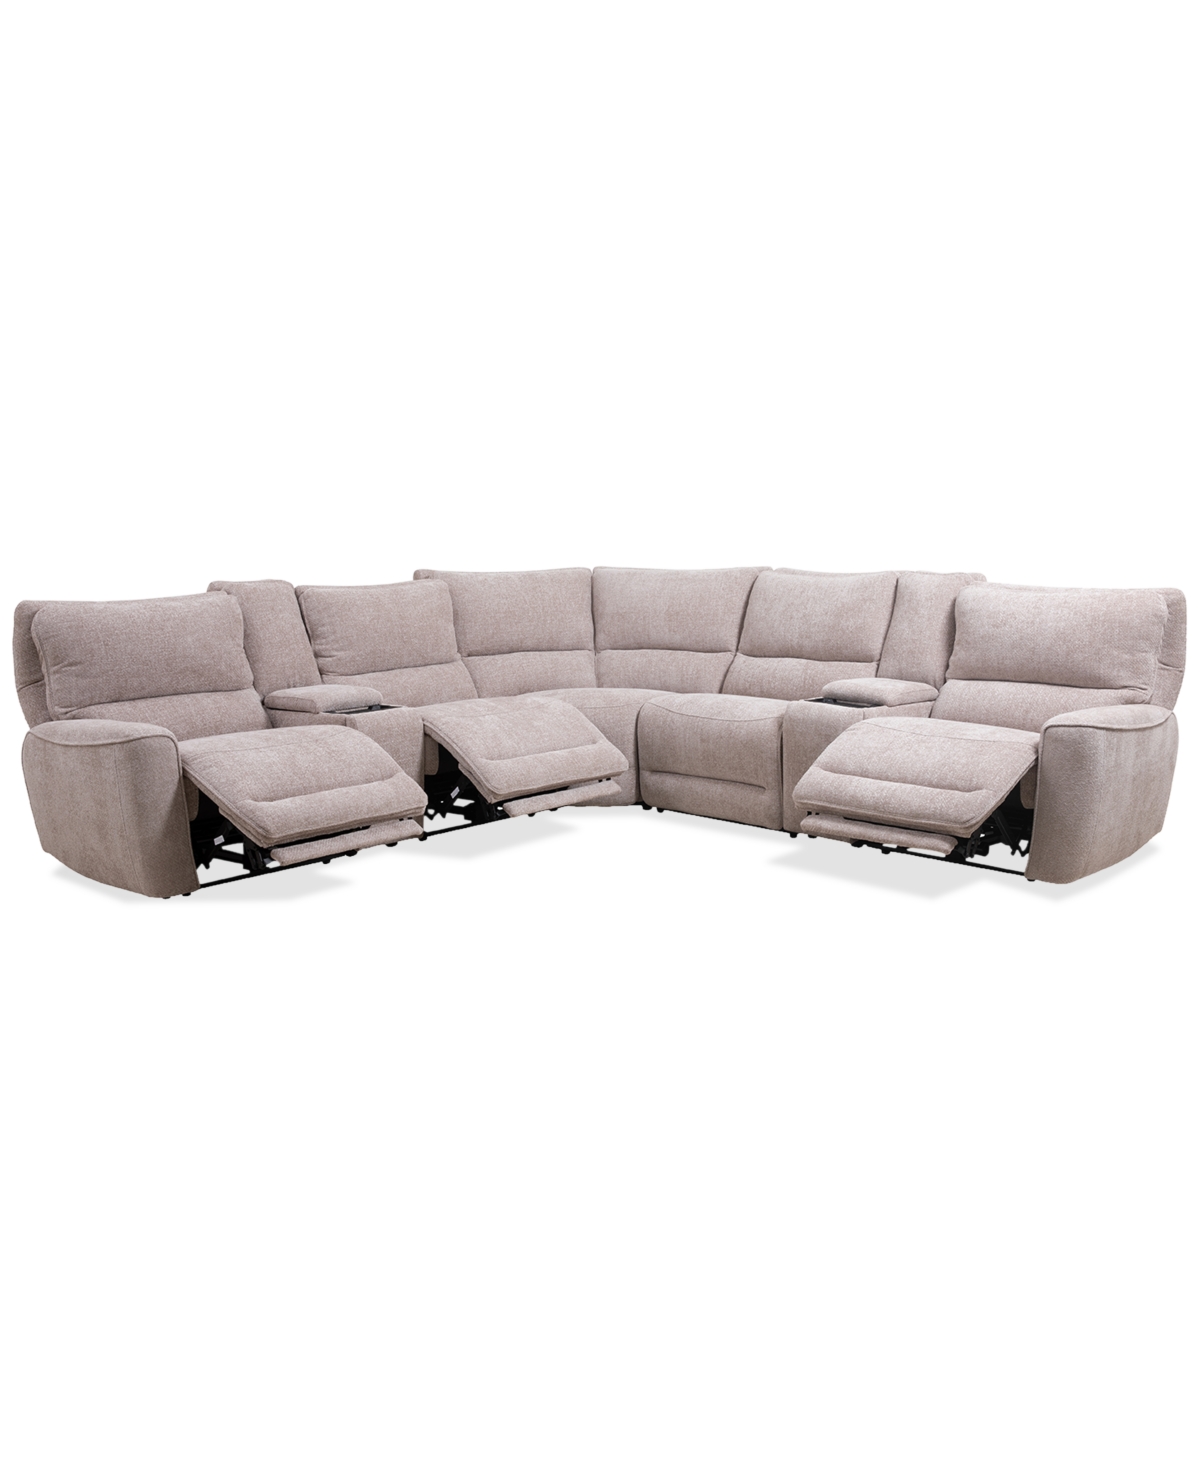 Macy's Deklyn 129" 7-pc. Zero Gravity Fabric Sectional With 3 Power Recliners & 2 Consoles, Created For Mac In Cobblestone